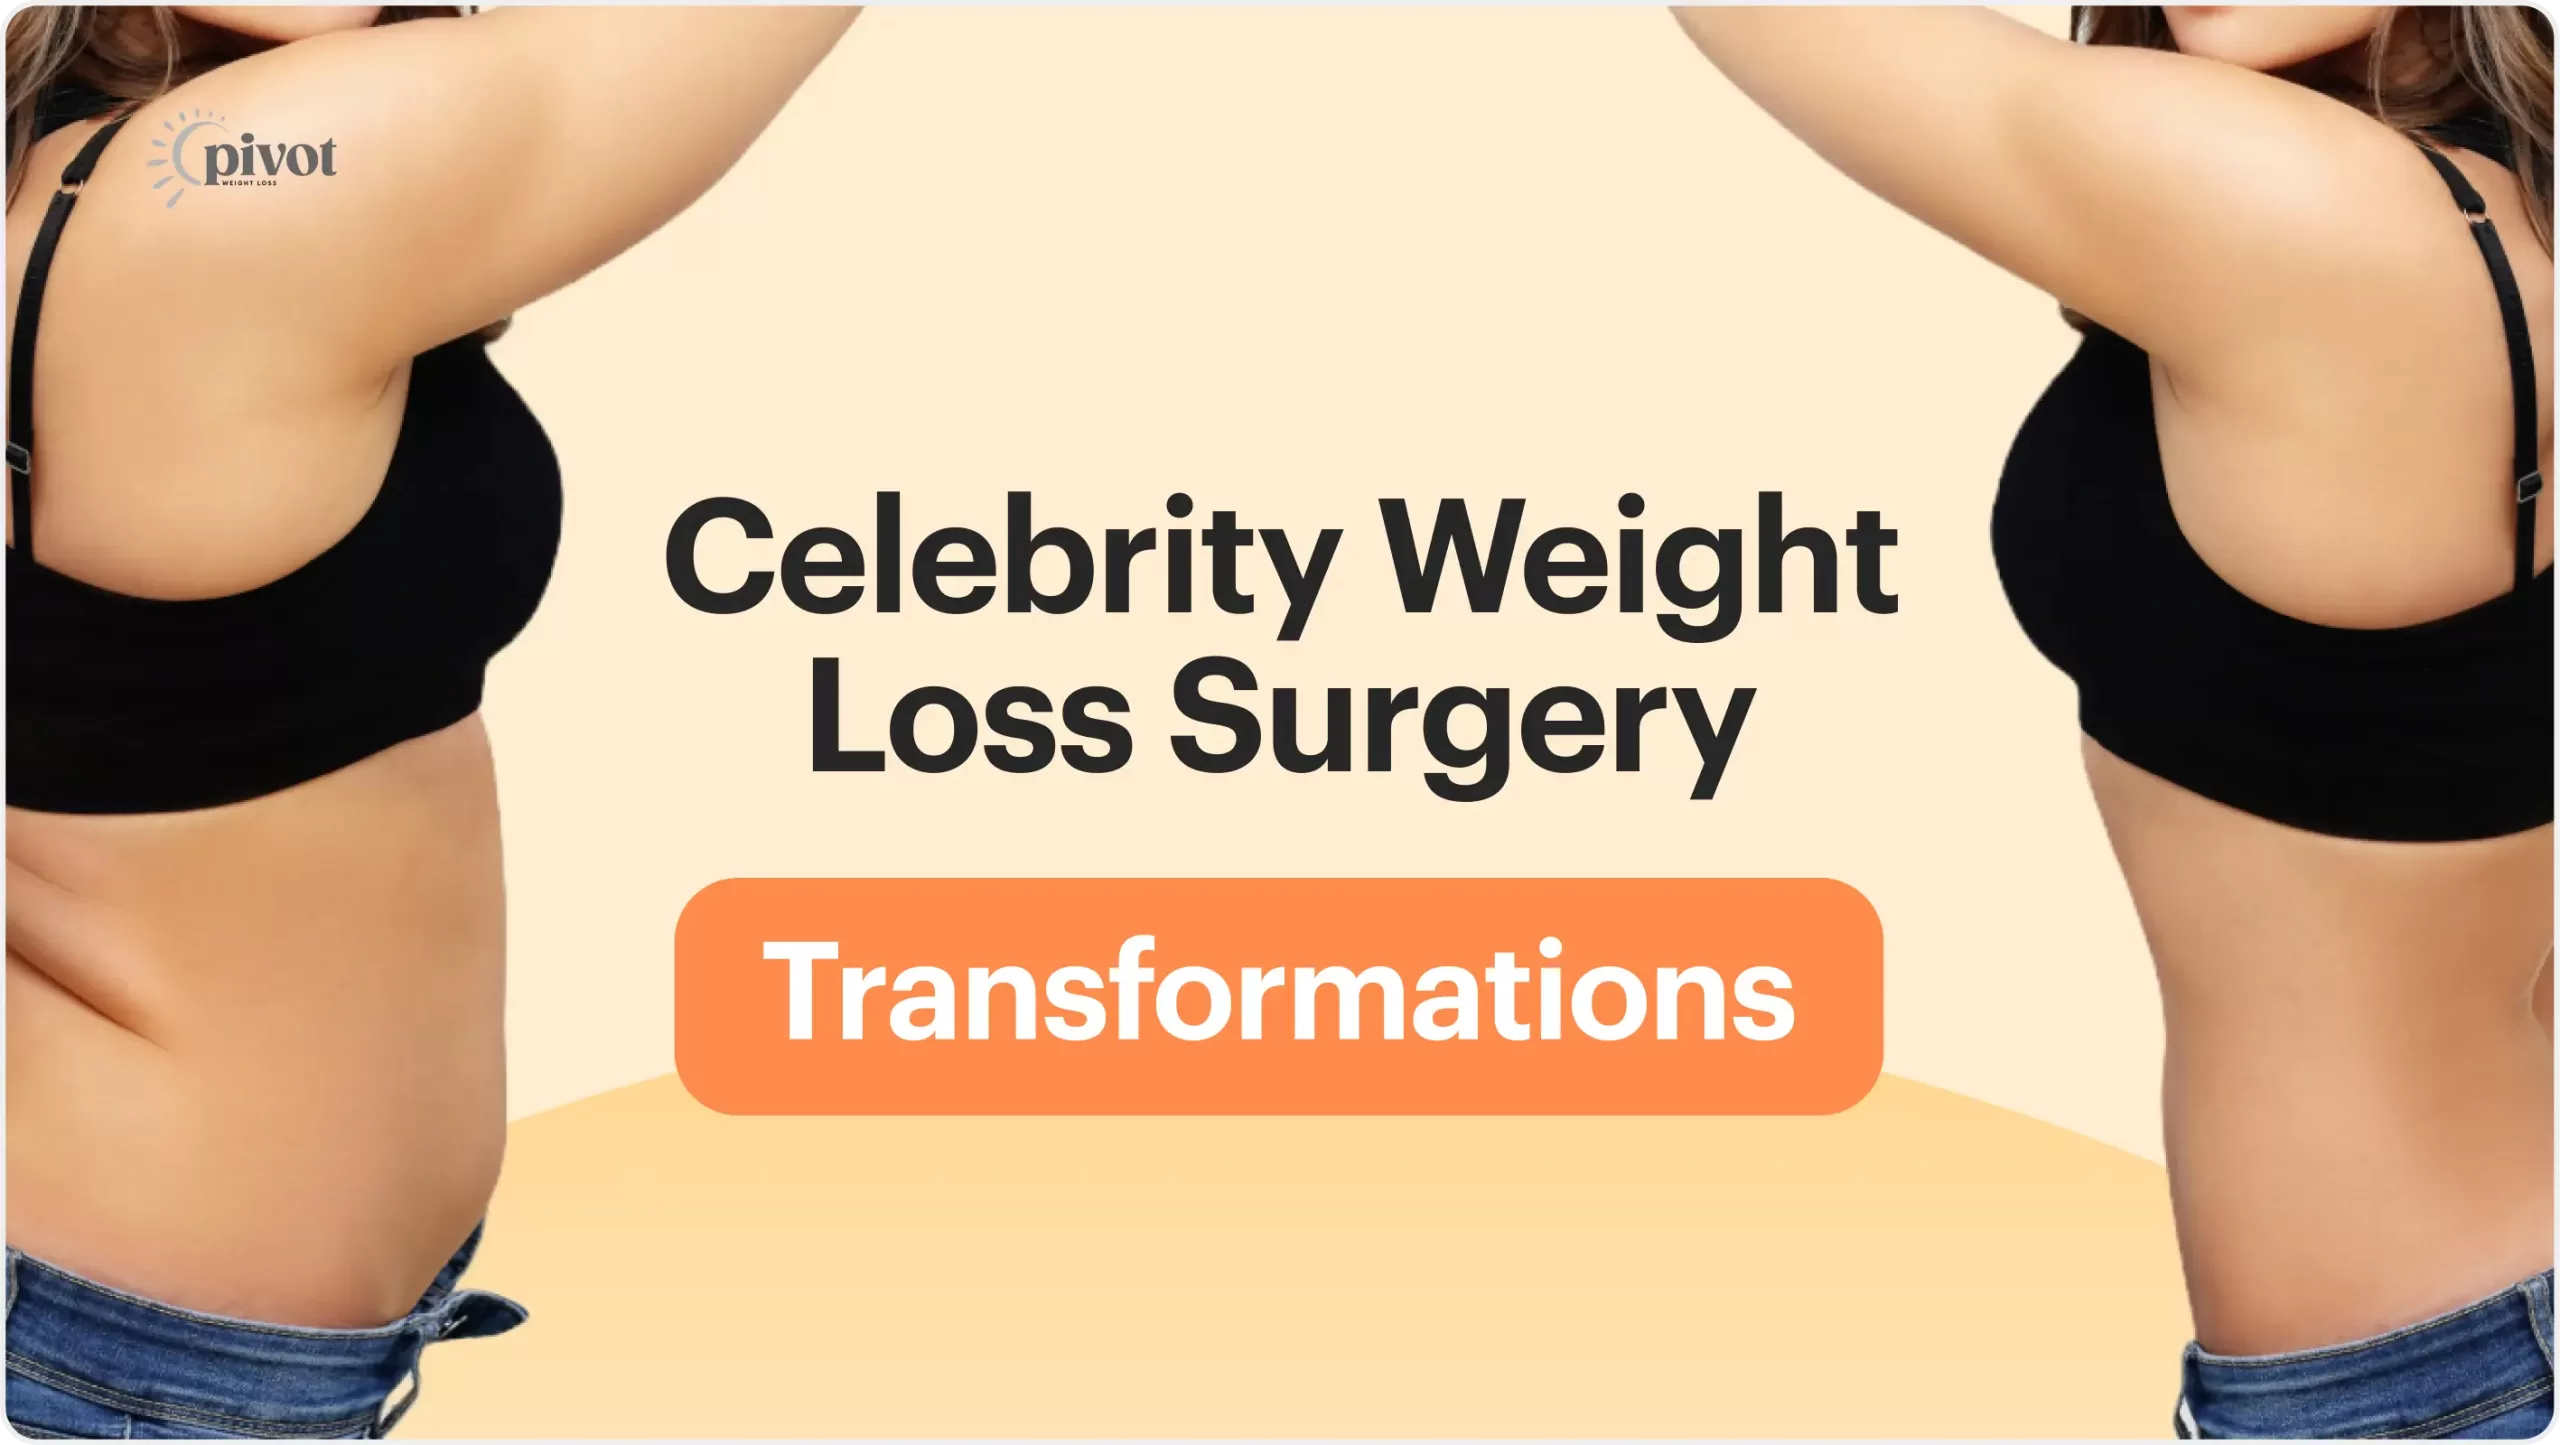 Celebrity Weight Loss Surgery Transformations